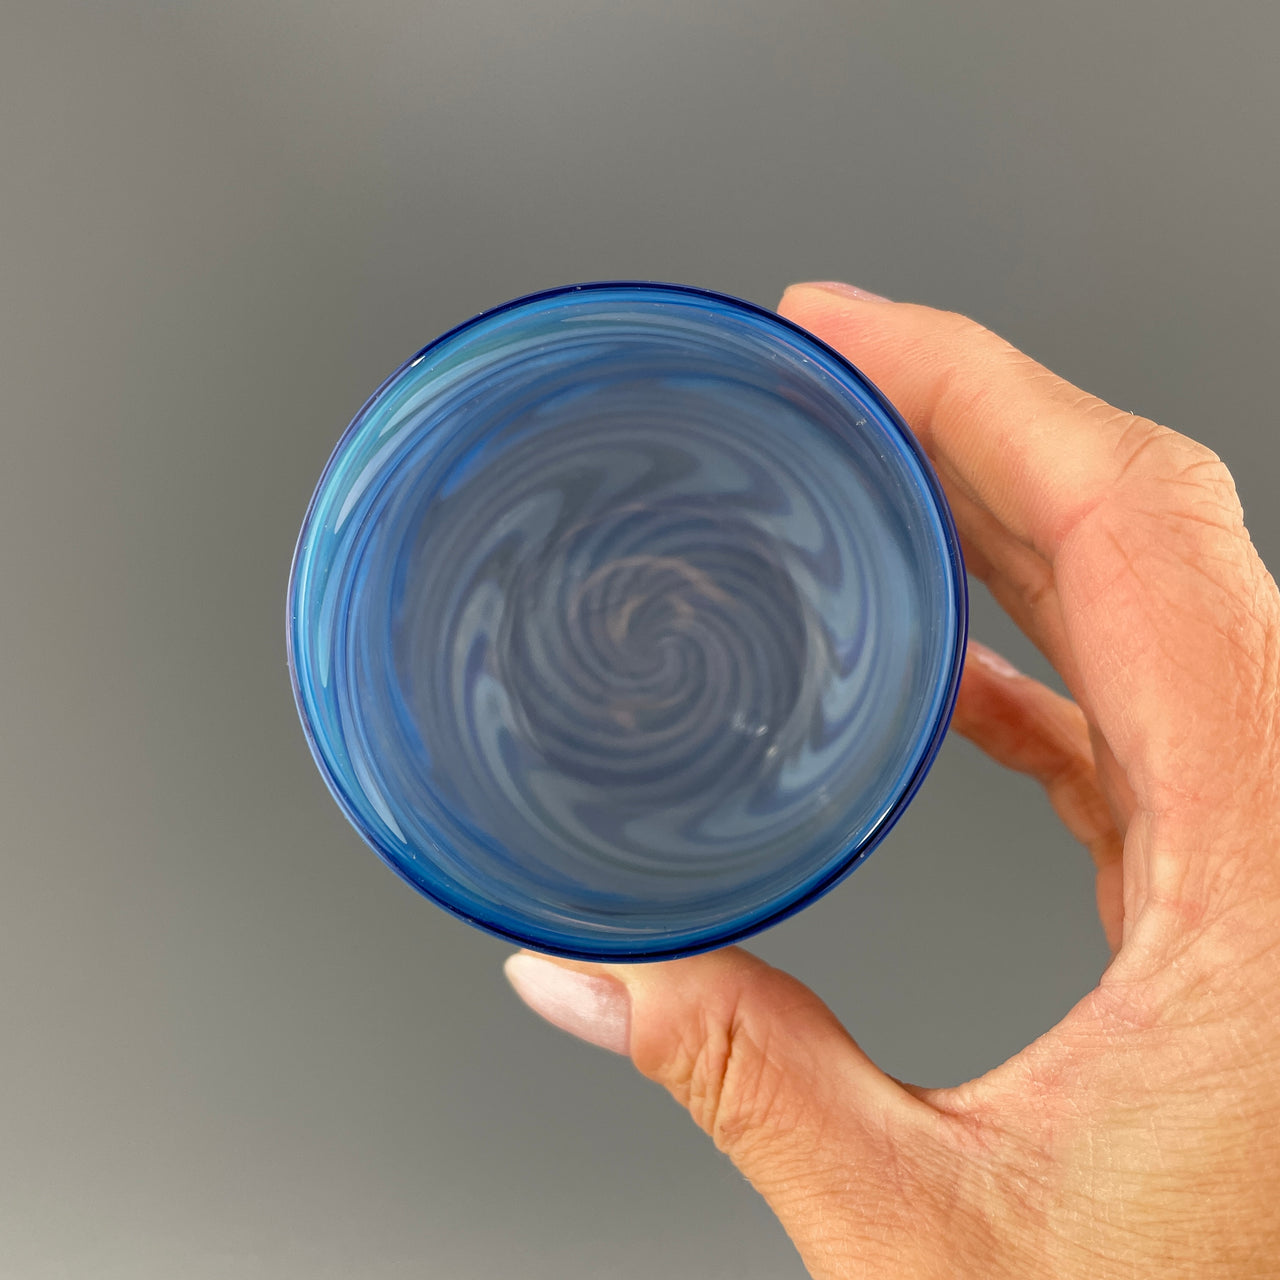 inside of a brilliant blue stemless wineglass